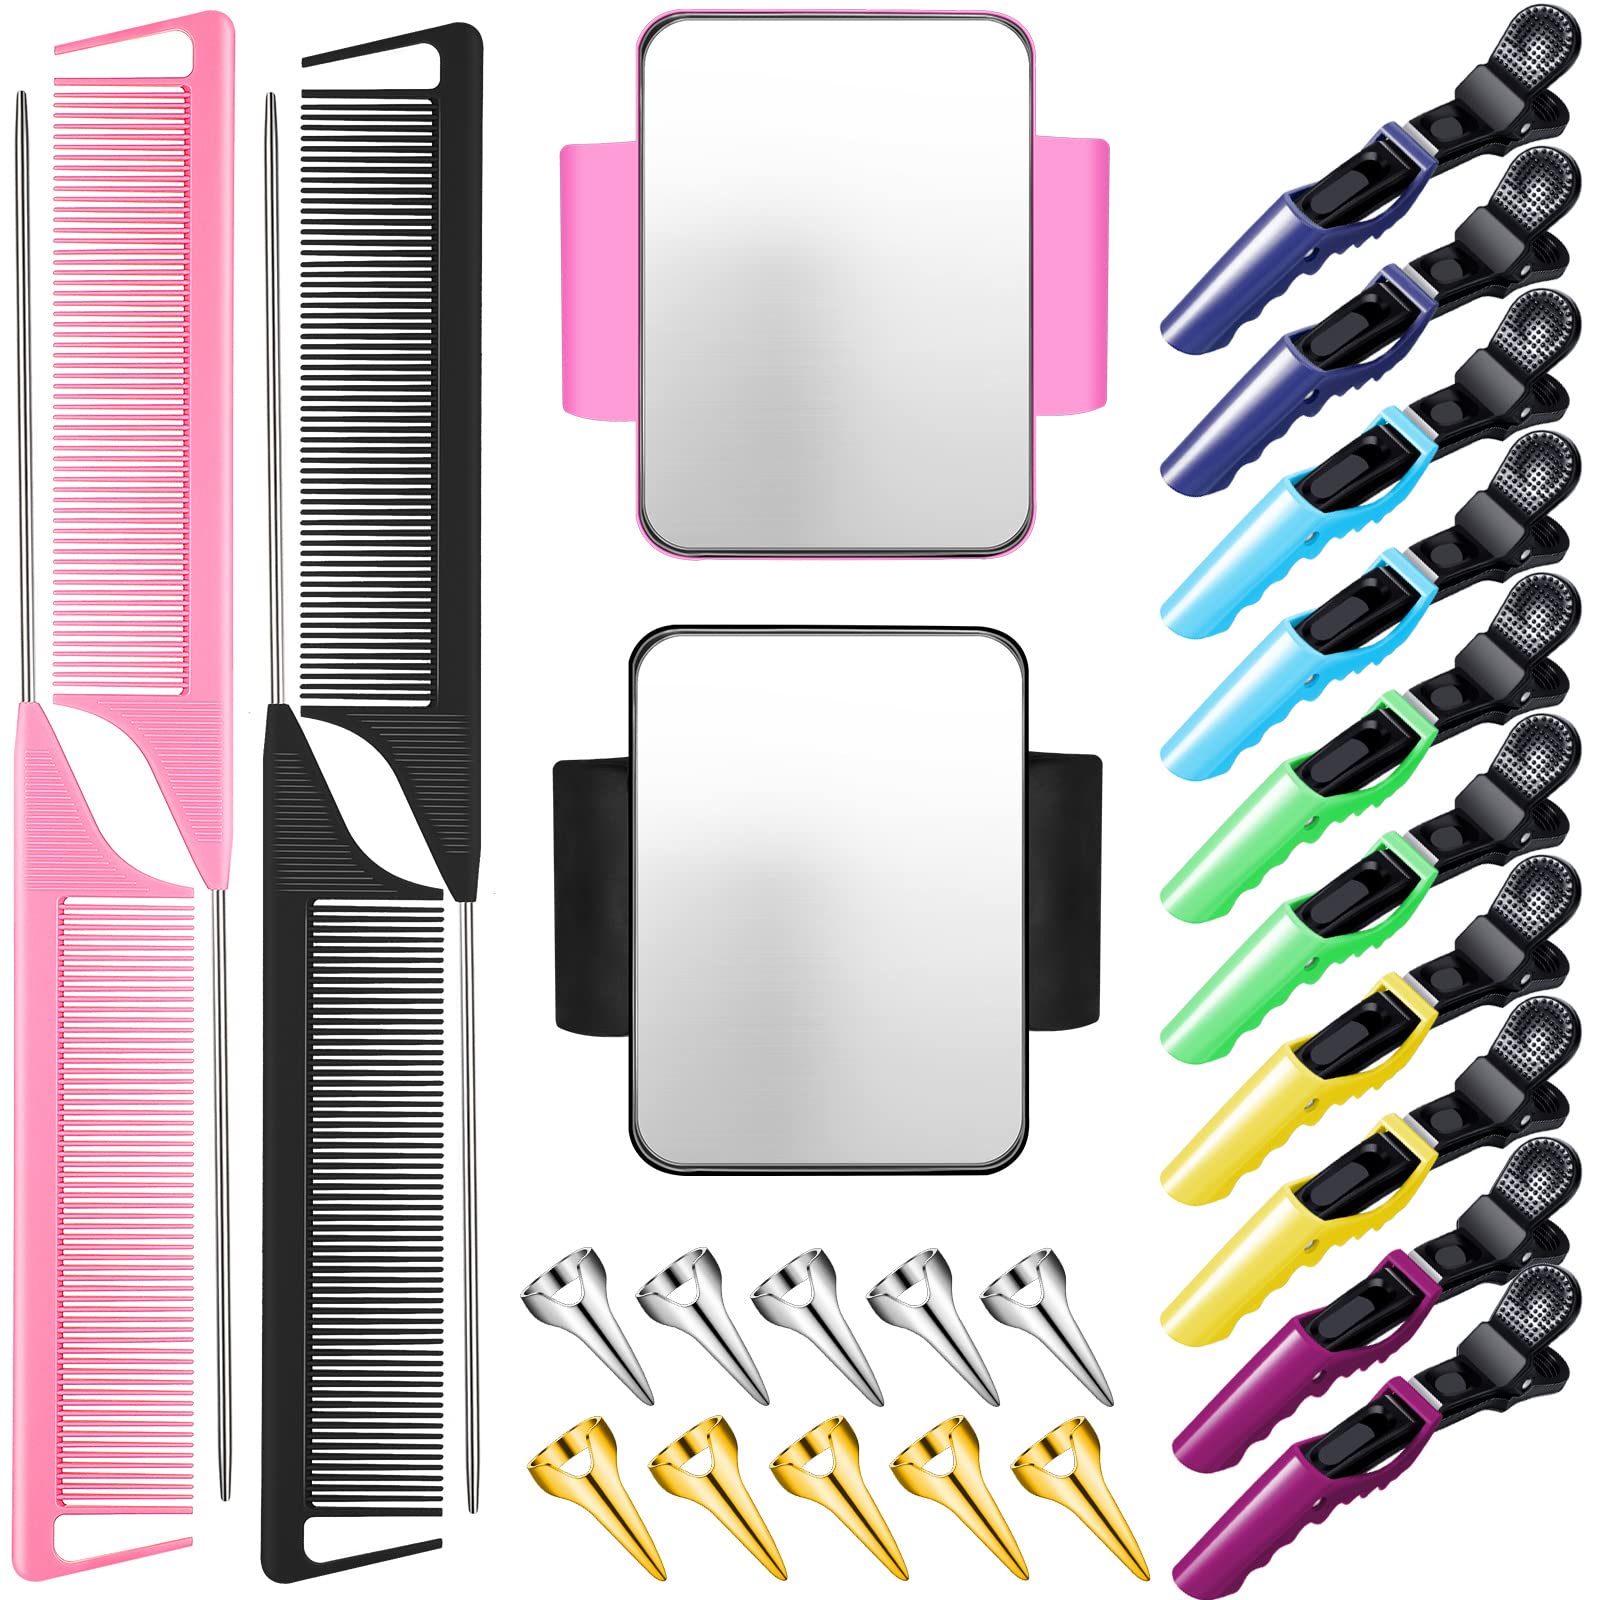 8 Pieces Hair Parting Ring Hair Selecting Ring 6 Hair Sectioning Styling  Clips Hair Parting Tool 2 Rat Tail Braiding Combs and 1 Magnetic Pin Holder